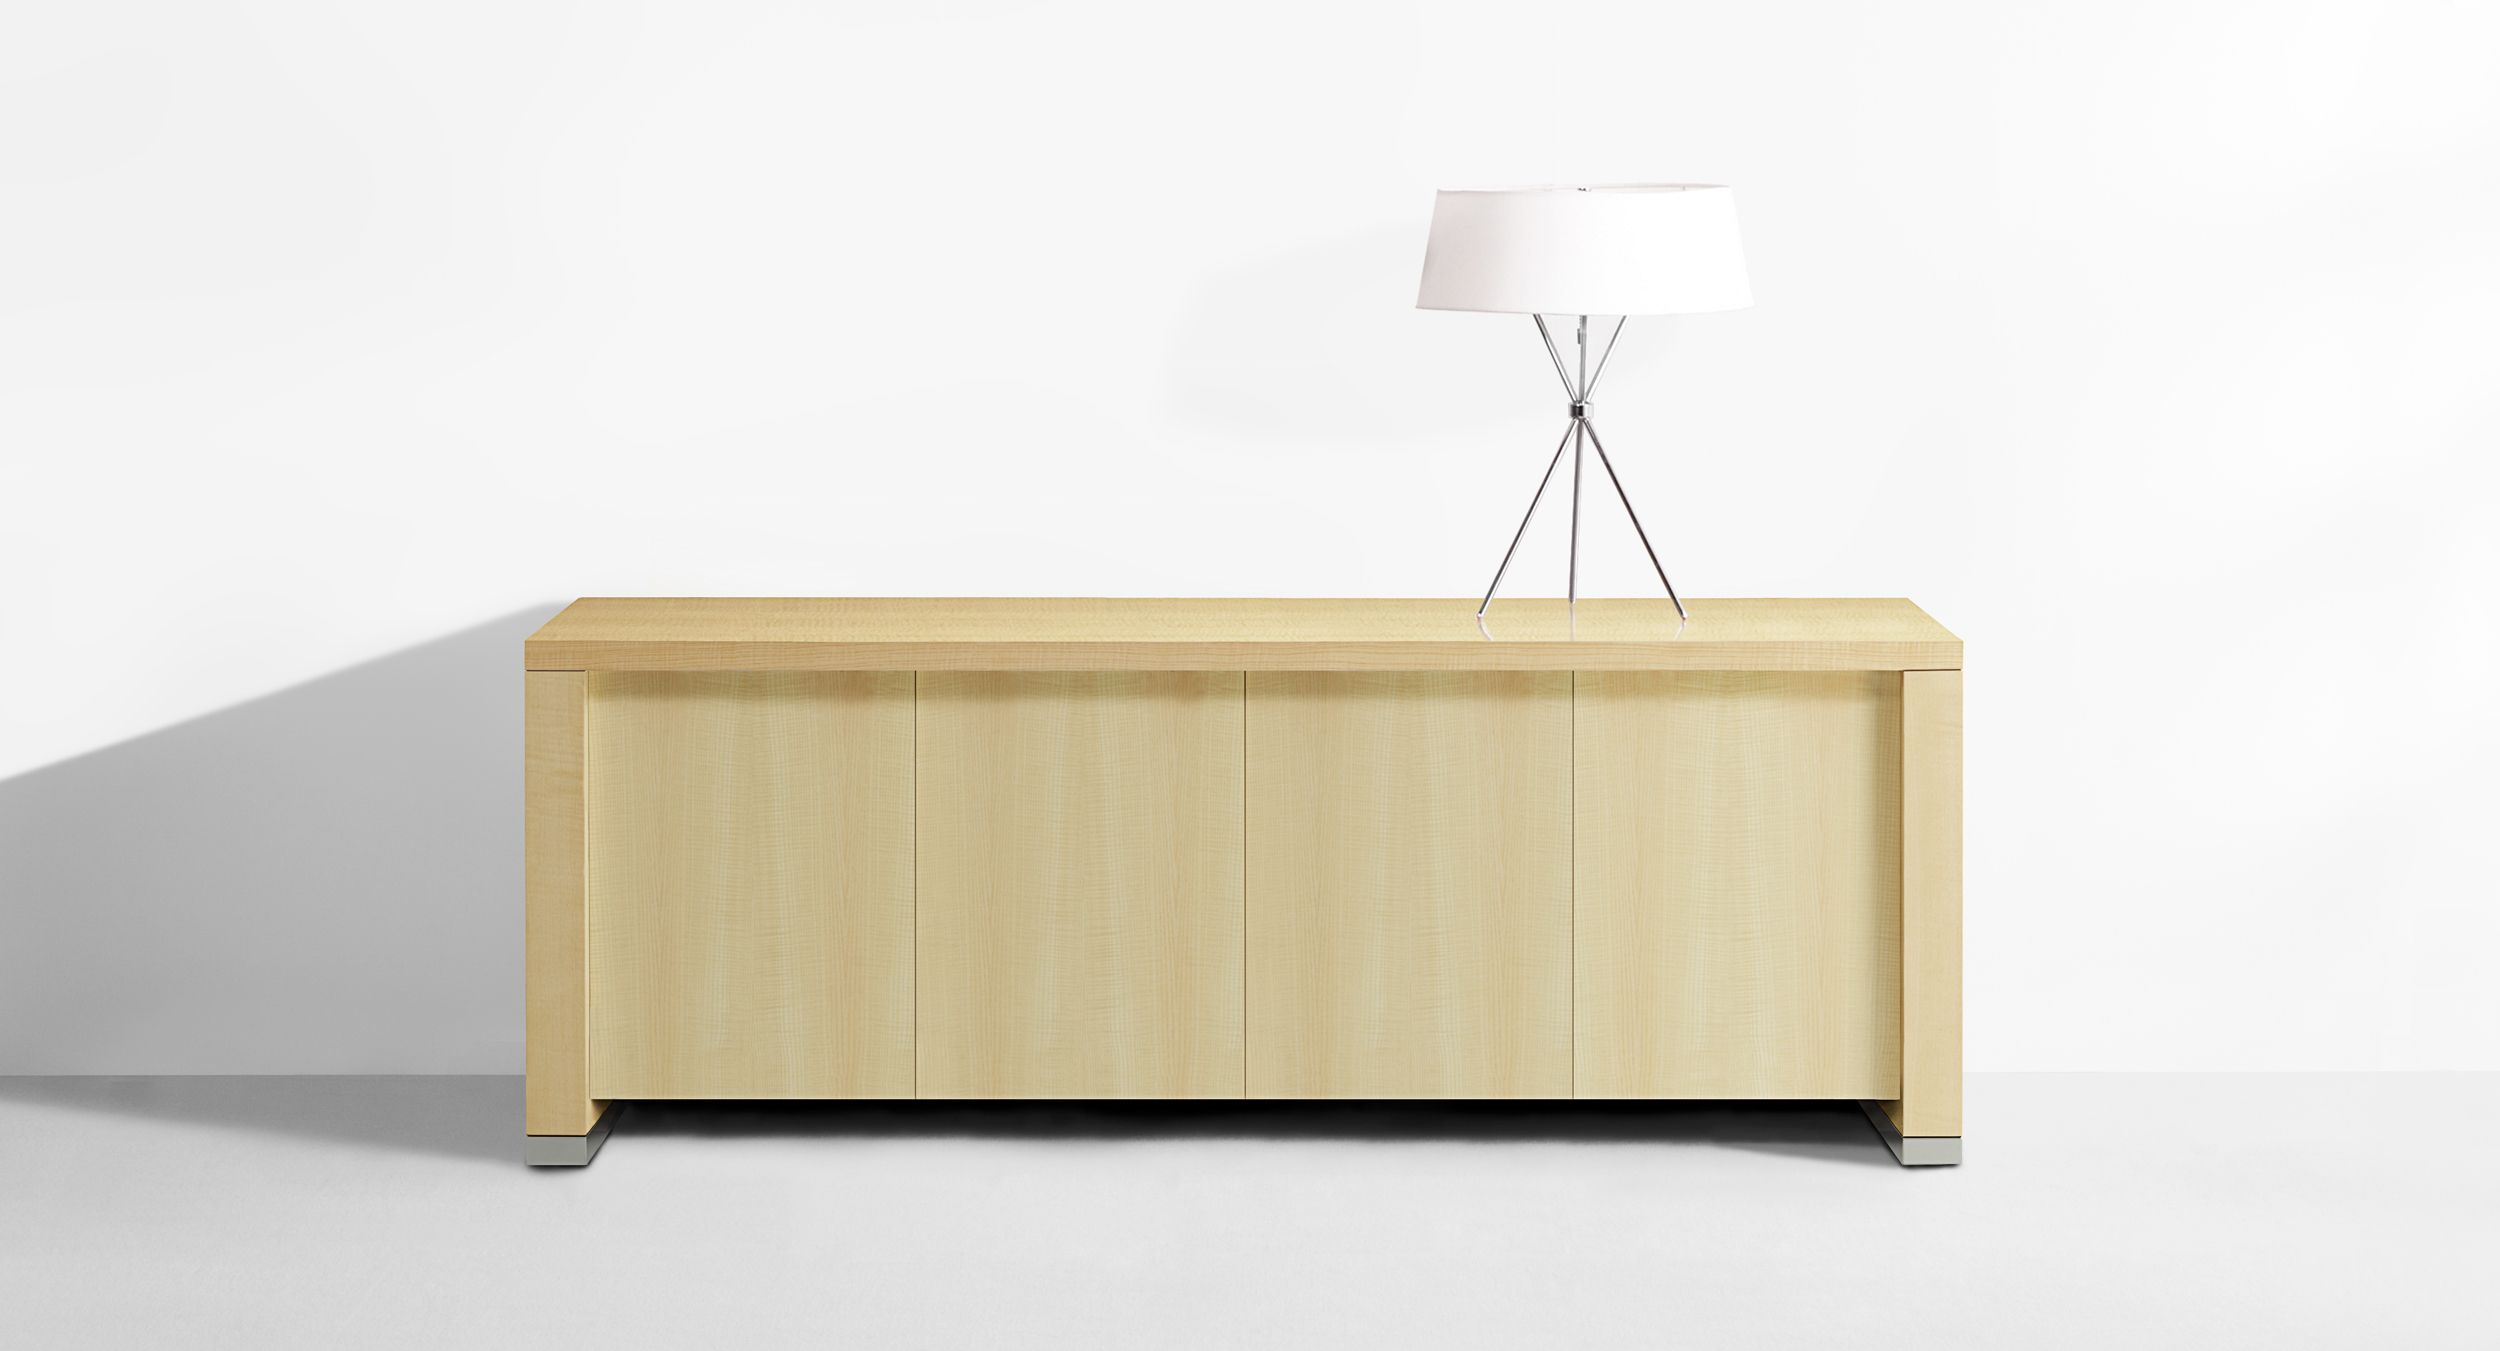 Motus mobile credenzas are available in multiple configurations and finishes.